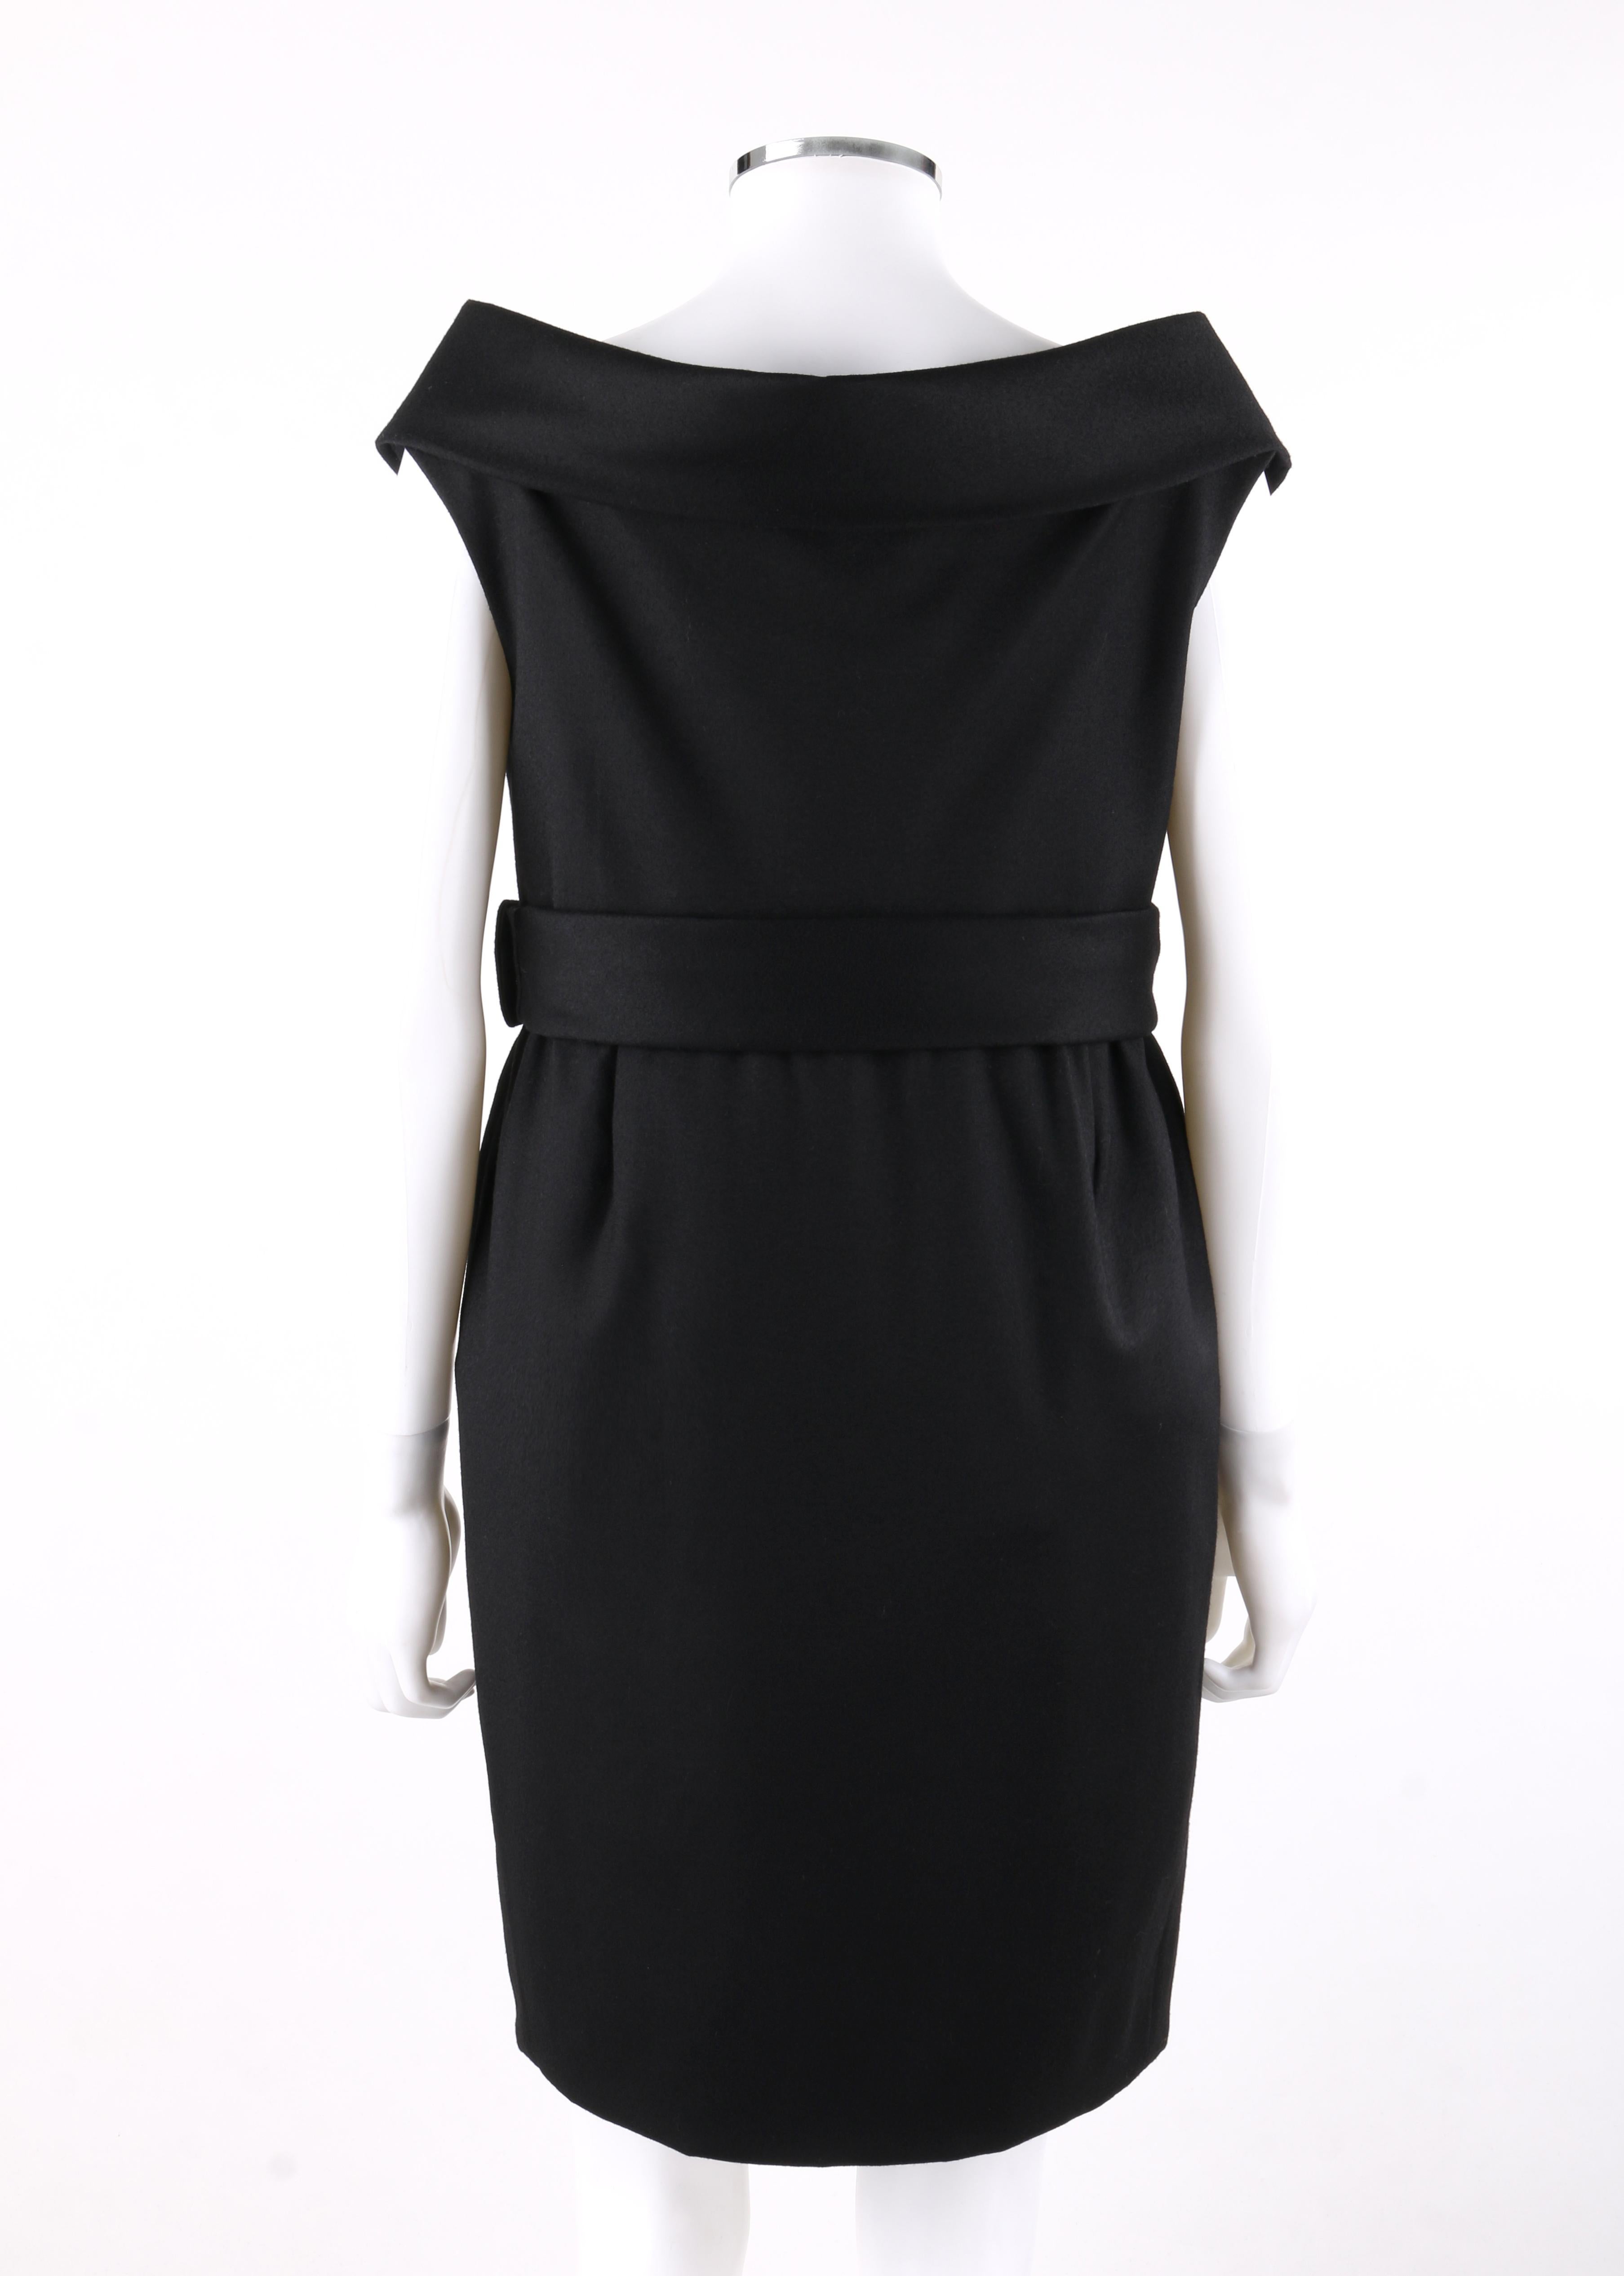 Alexander McQueen A/W 2006 Black Wool Portrait Collar Shift Dress  In New Condition For Sale In Thiensville, WI